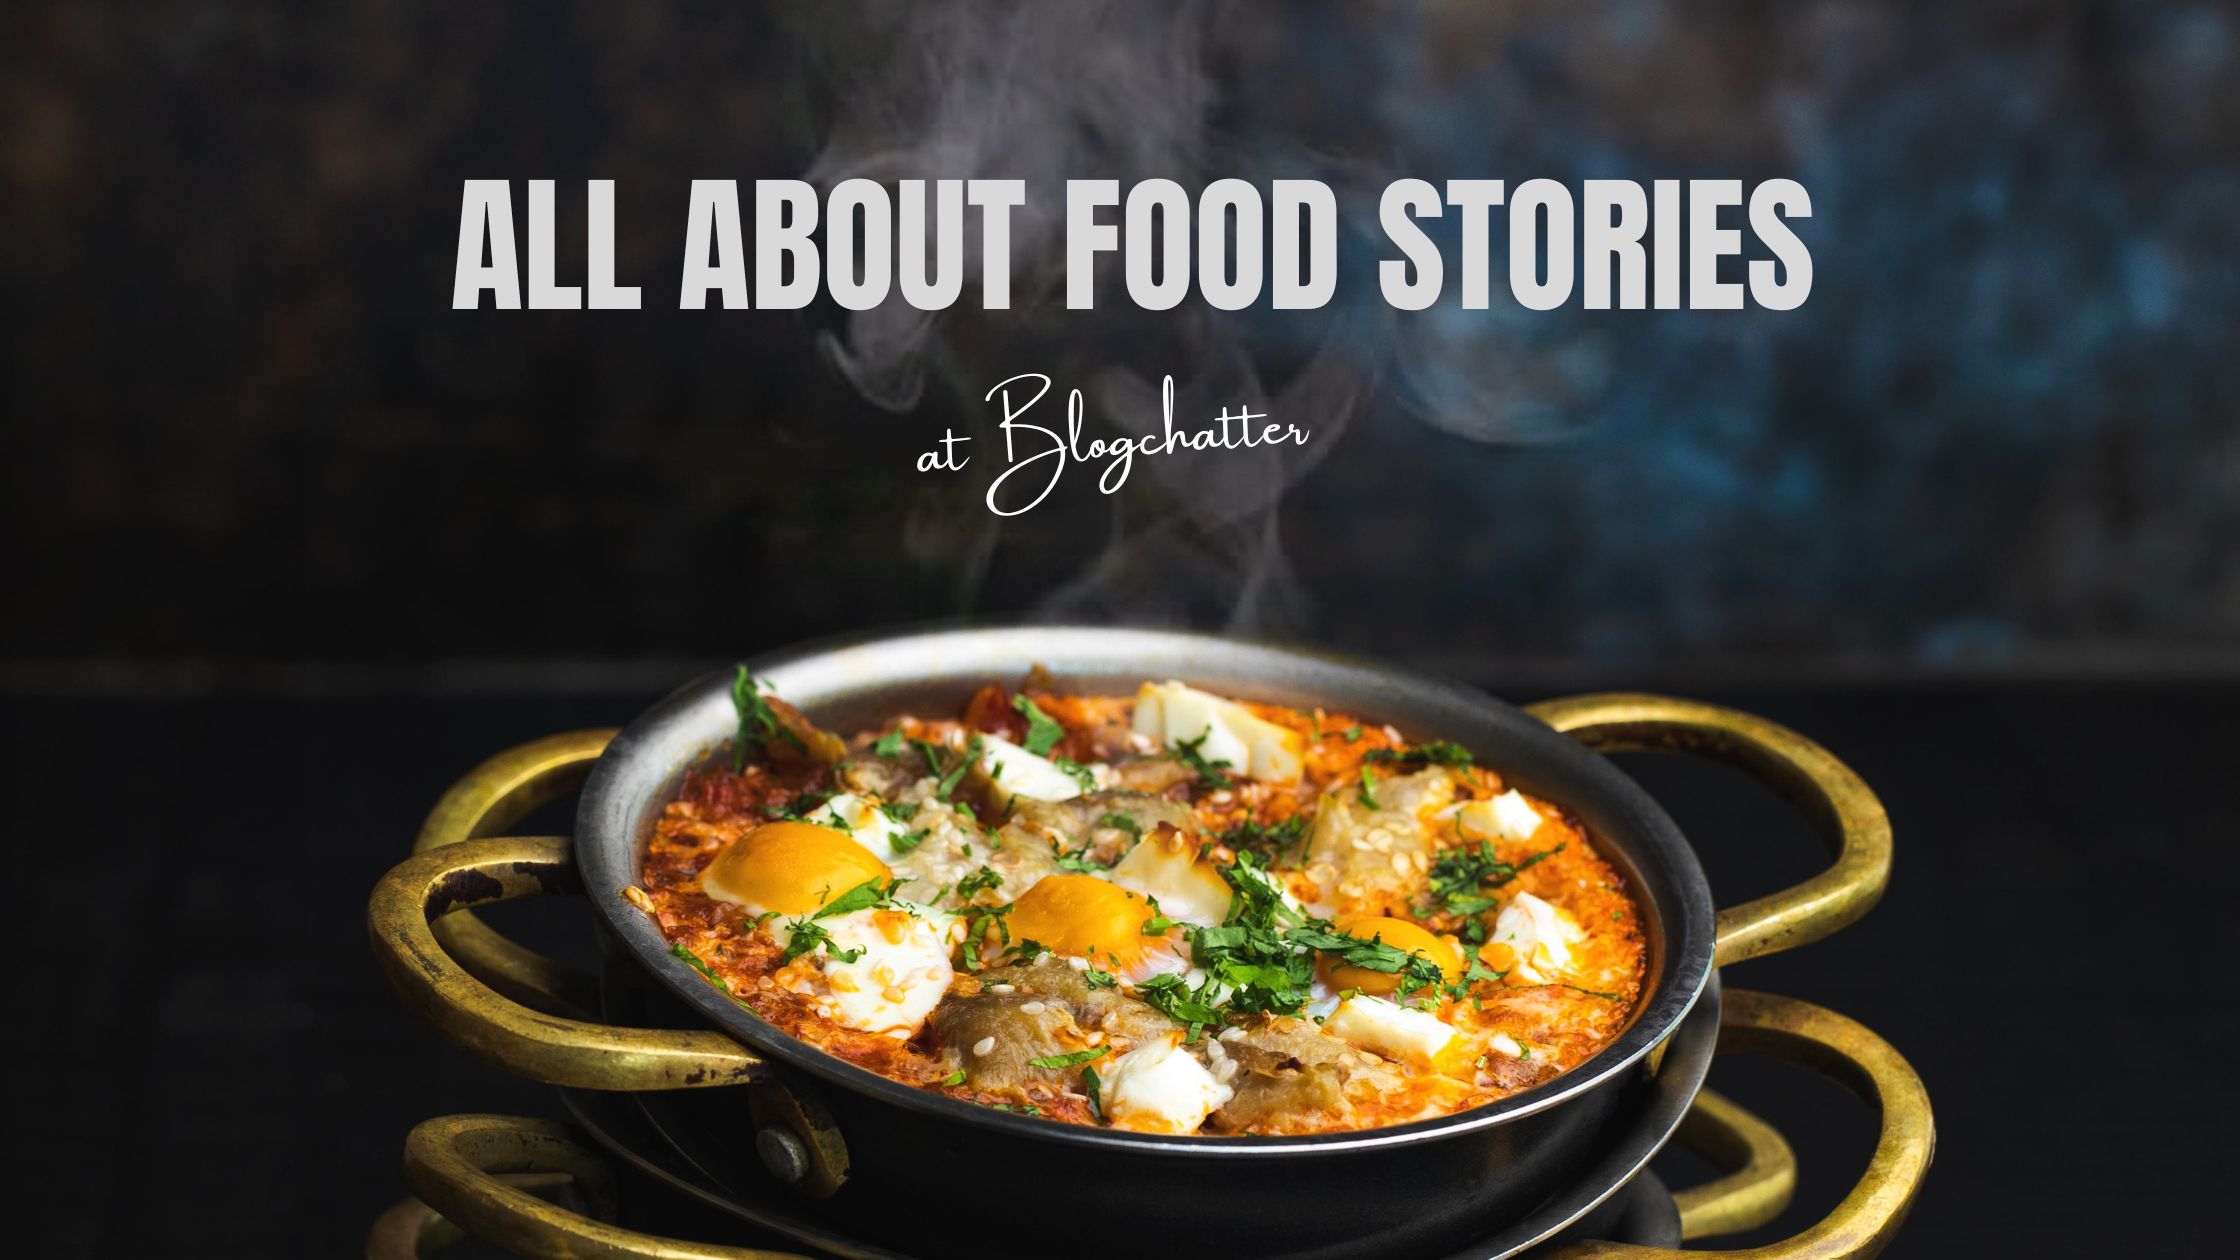 All about Food Stories at Blogchatter